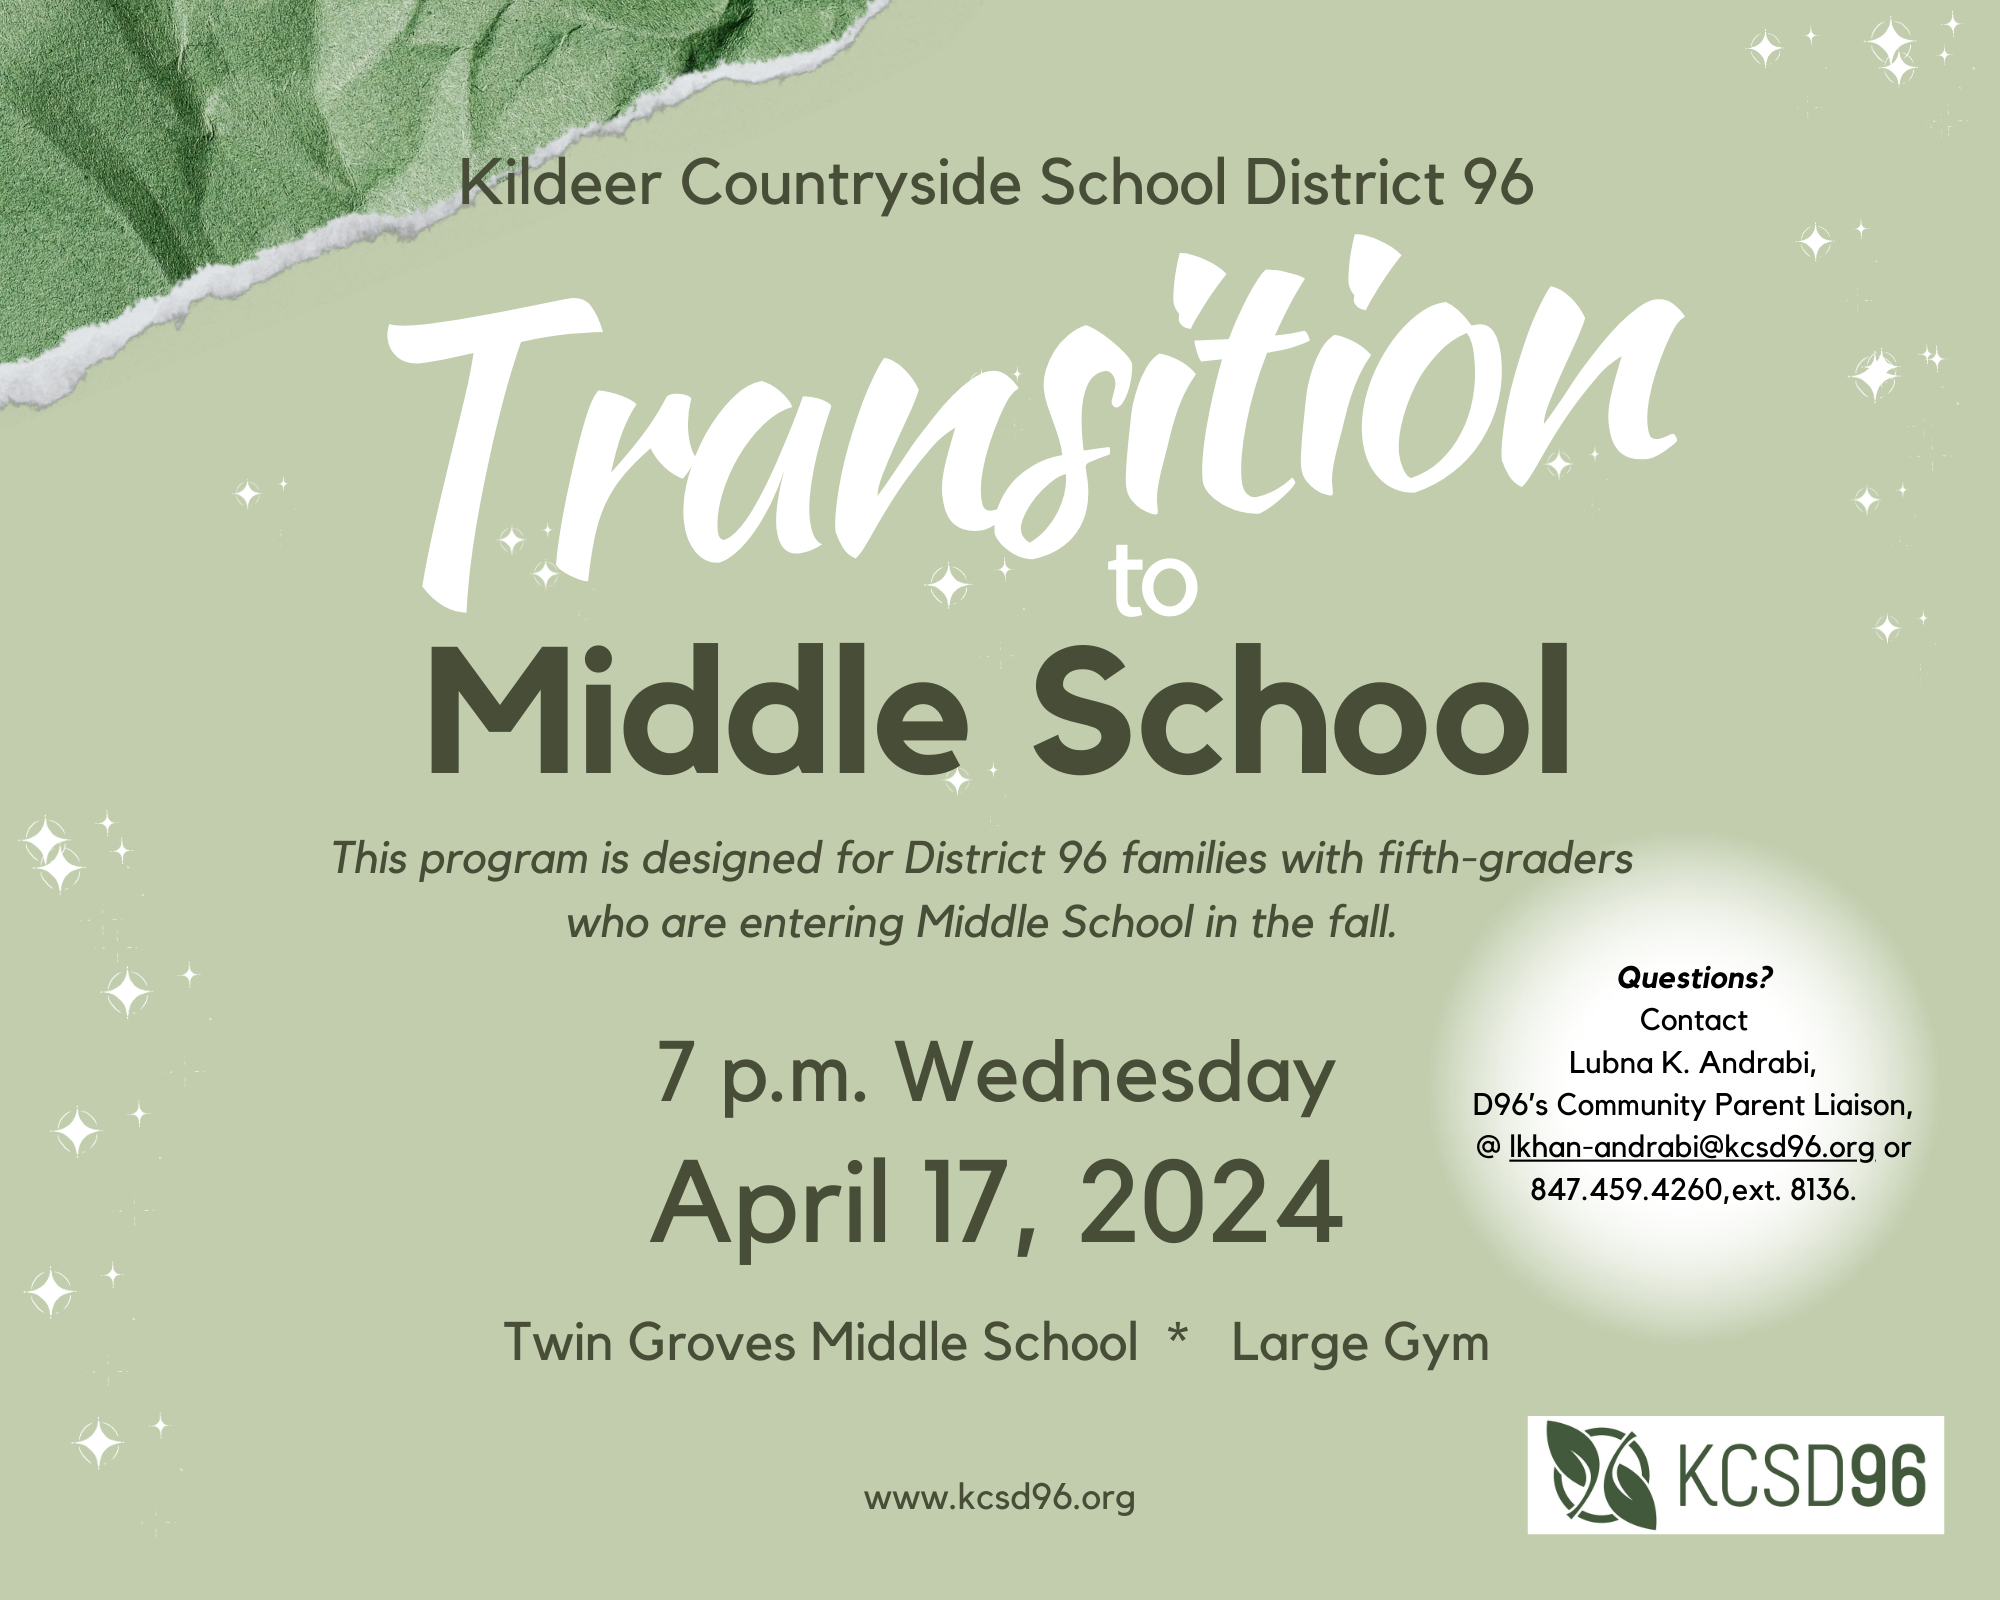 Transition to Middle School: April 17, 2024